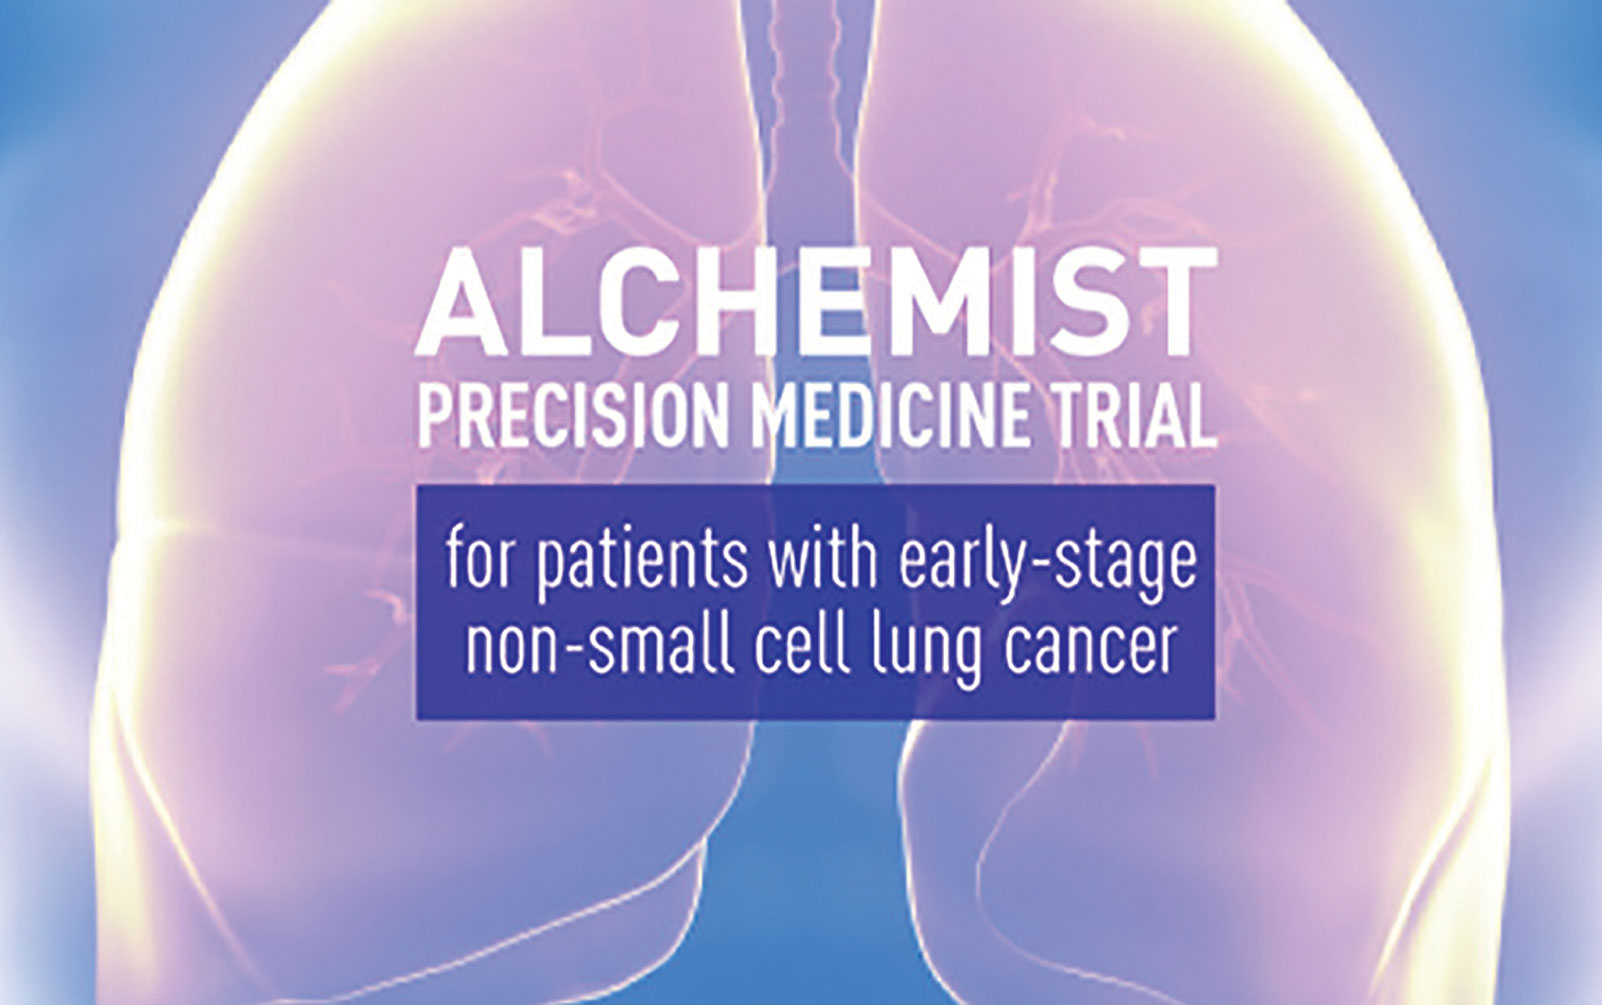 National Cancer Institute Adds Latest Clinical Trial to the ALCHEMIST Platform